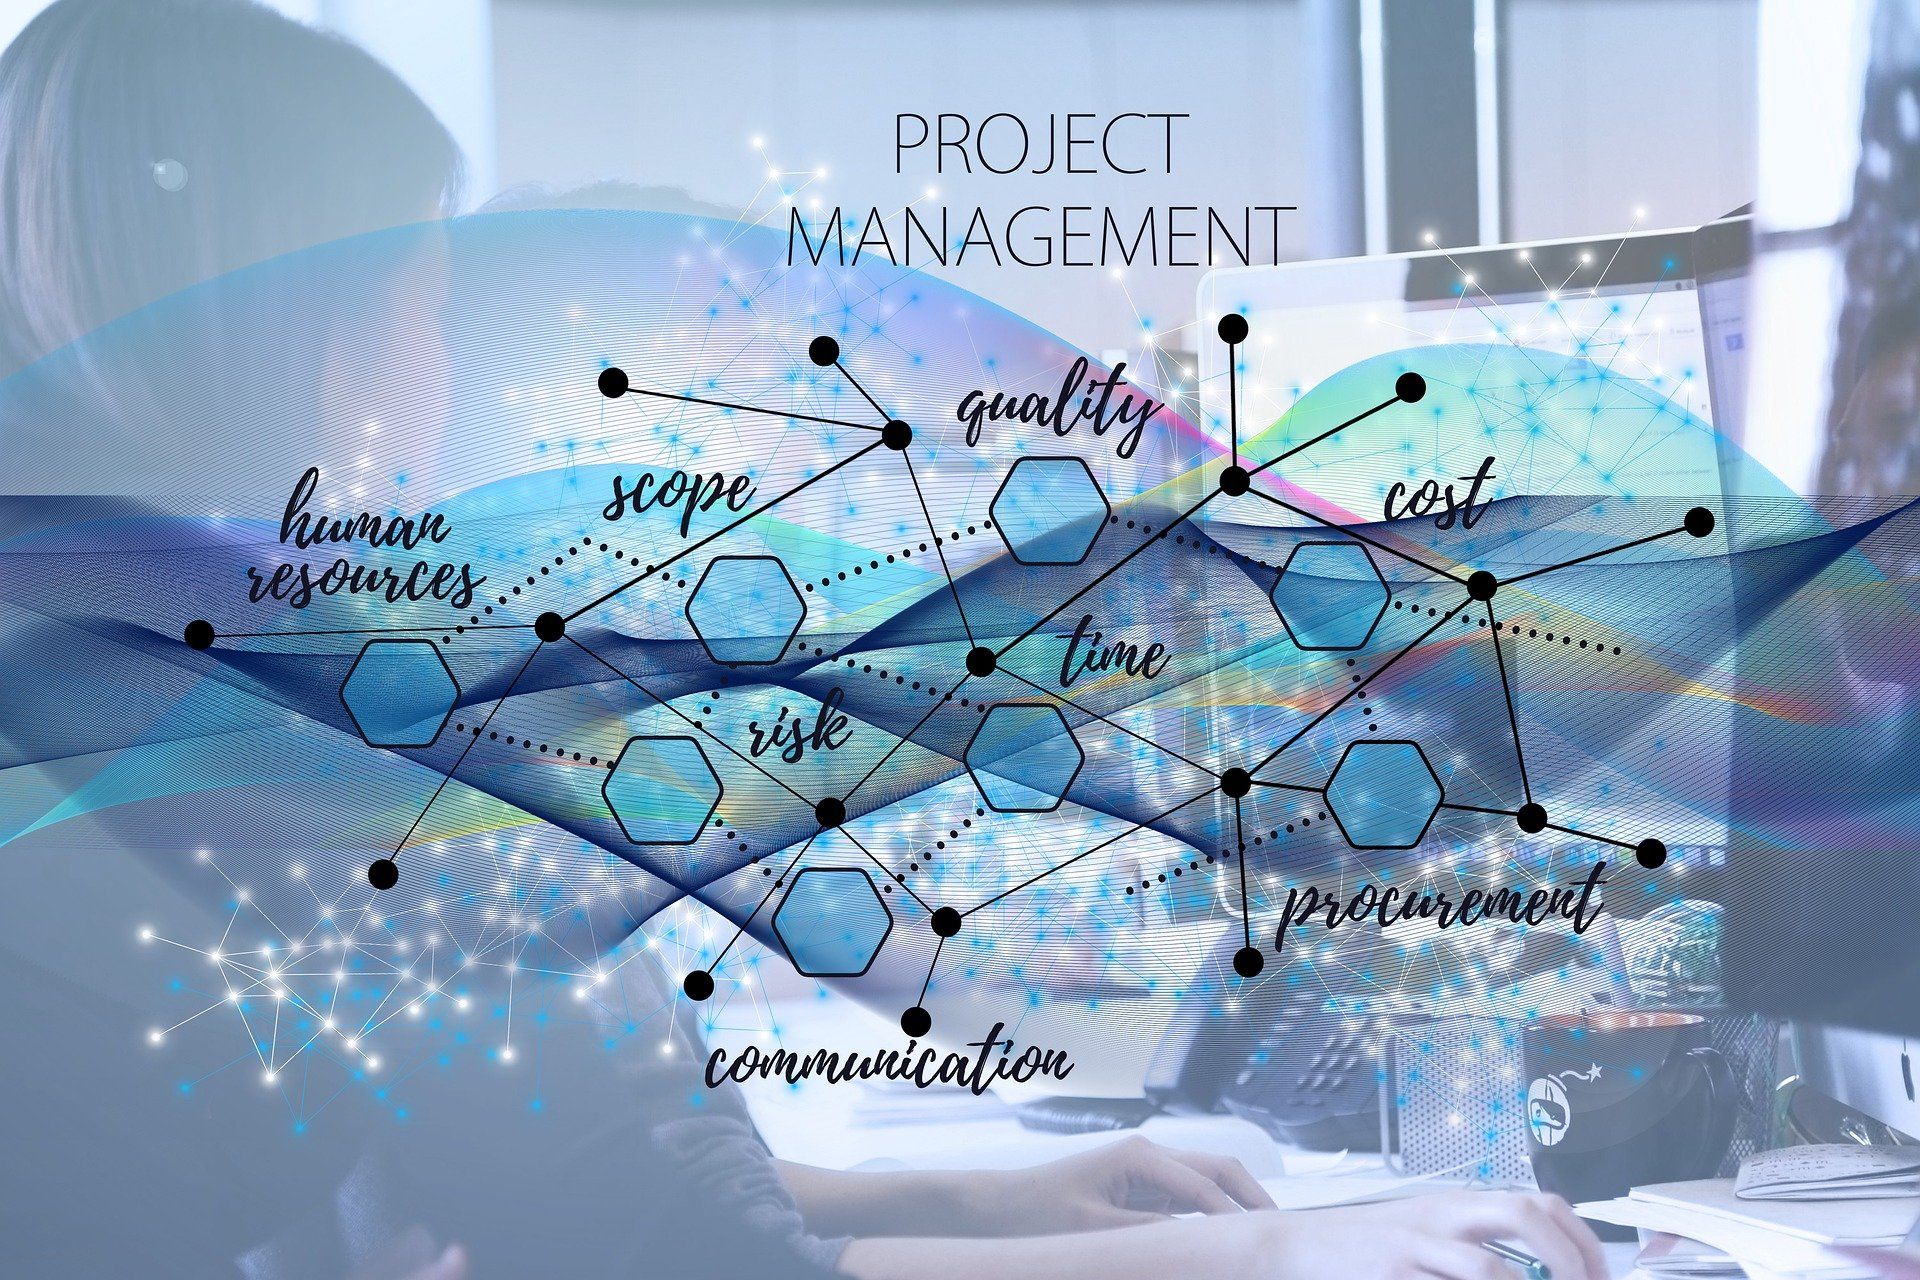 Concept Illustration for Project Management mentioning various skills required for Project Management.